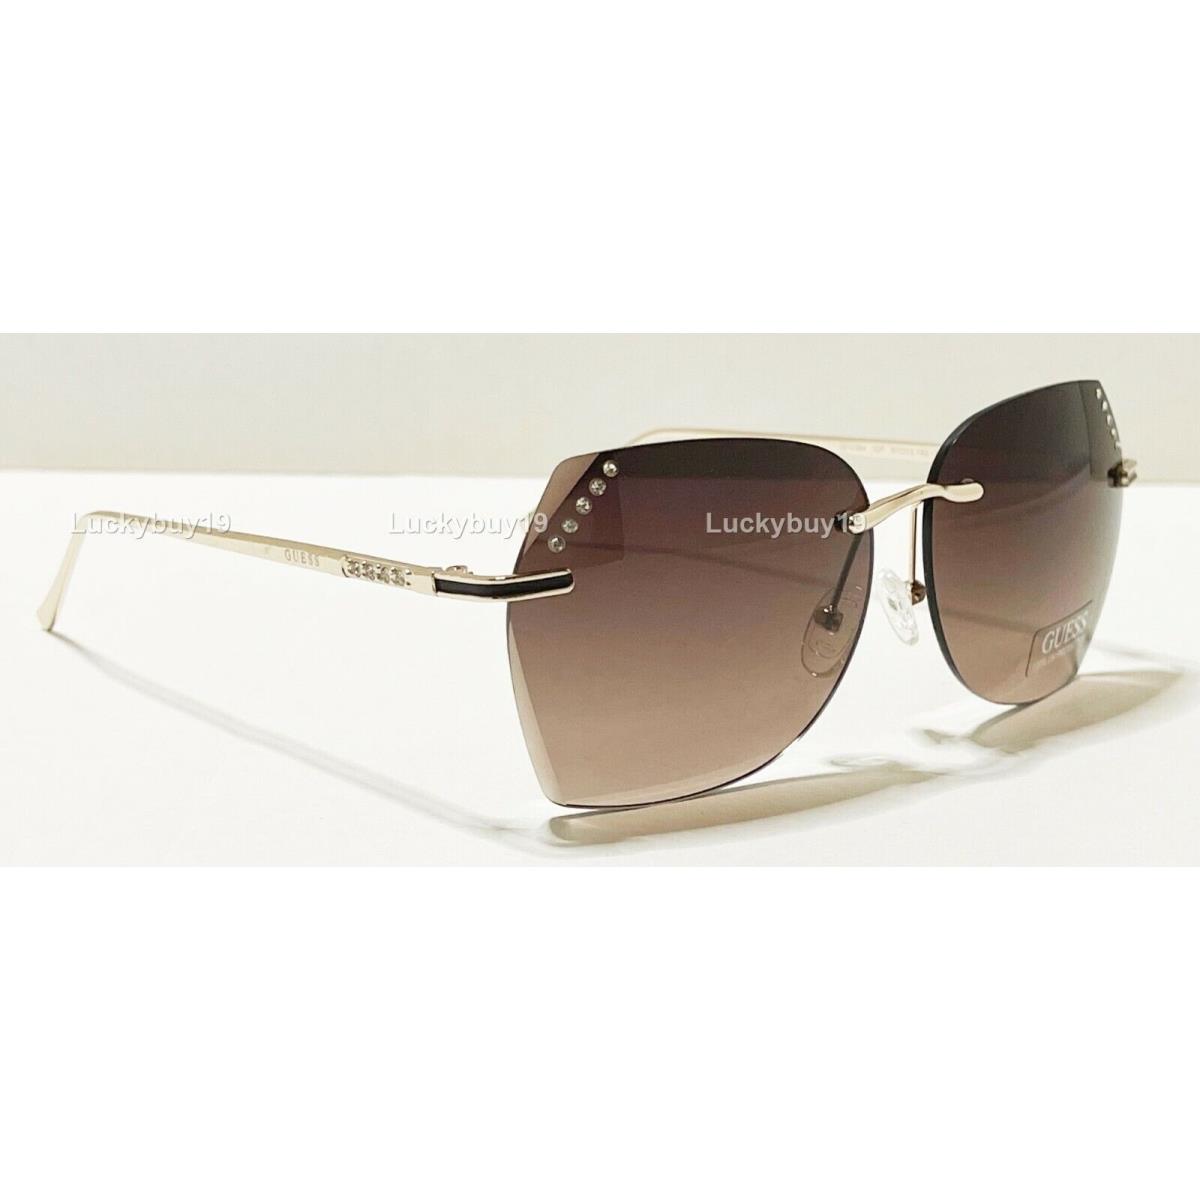 Guess sunglasses  - Gold Frame, Brown Lens 4